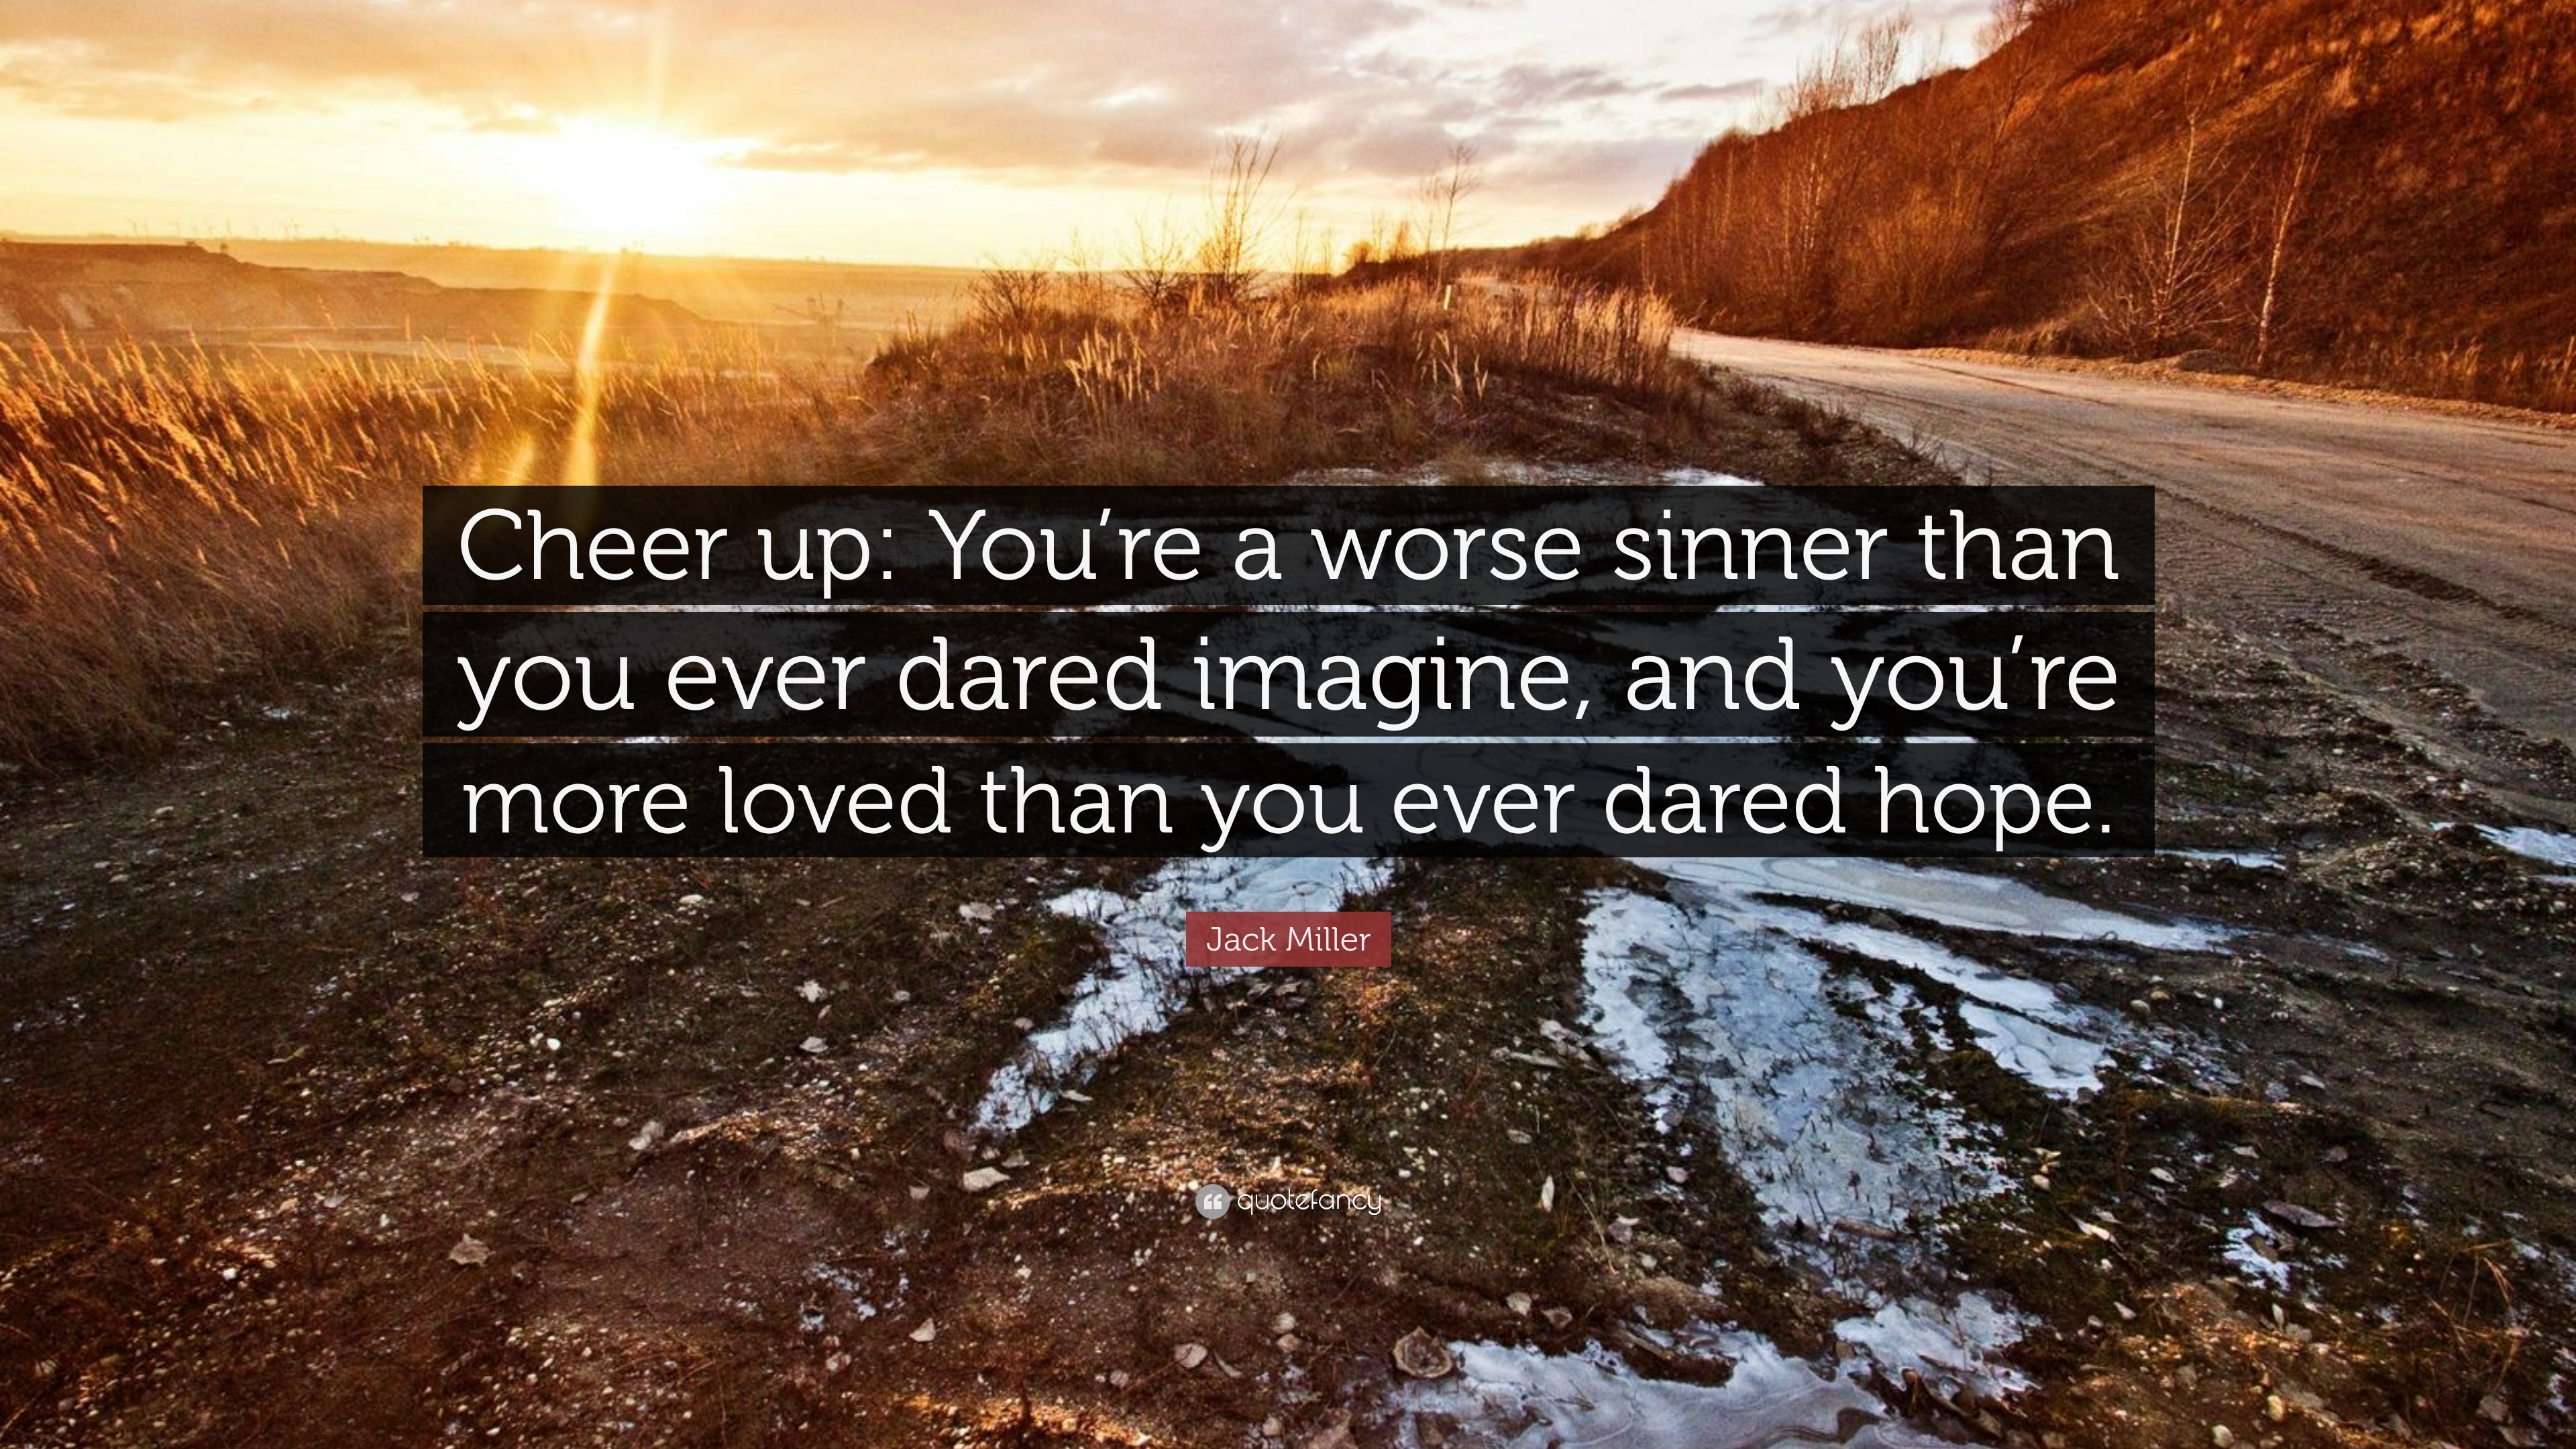 1583259-Jack-Miller-Quote-Cheer-up-You-re-a-worse-sinner-than-you-ever.jpg